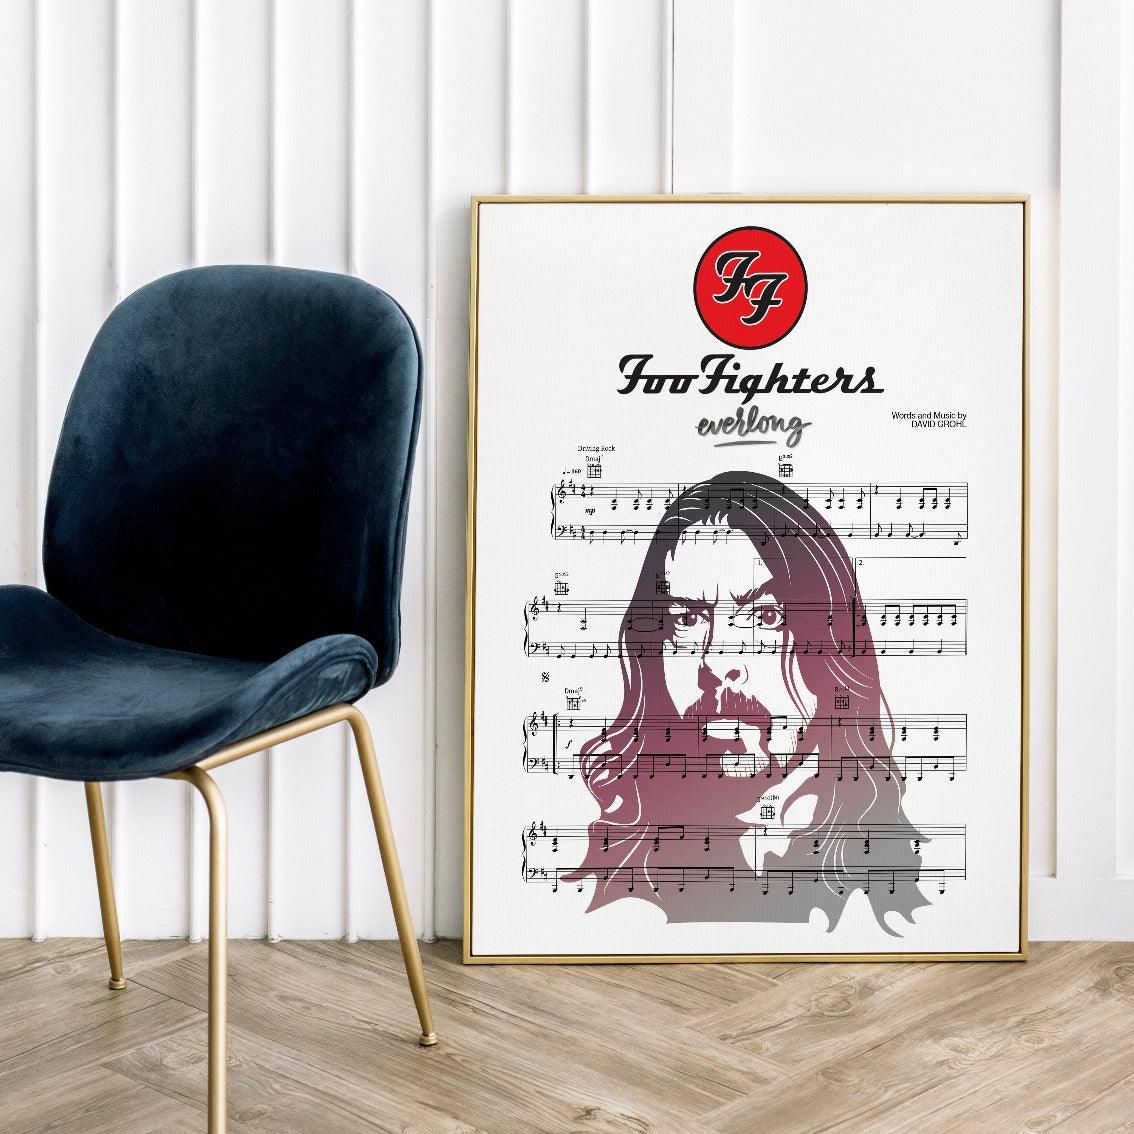 This Foo Fighters - Everlong Poster is perfect for any fan of the Foo Fighters. The poster features the lyrics to the popular song "Everlong" and is a great way to show your support for the band. This poster is sure to make a great addition to any collection. A4 Posters uk By 98types art online.